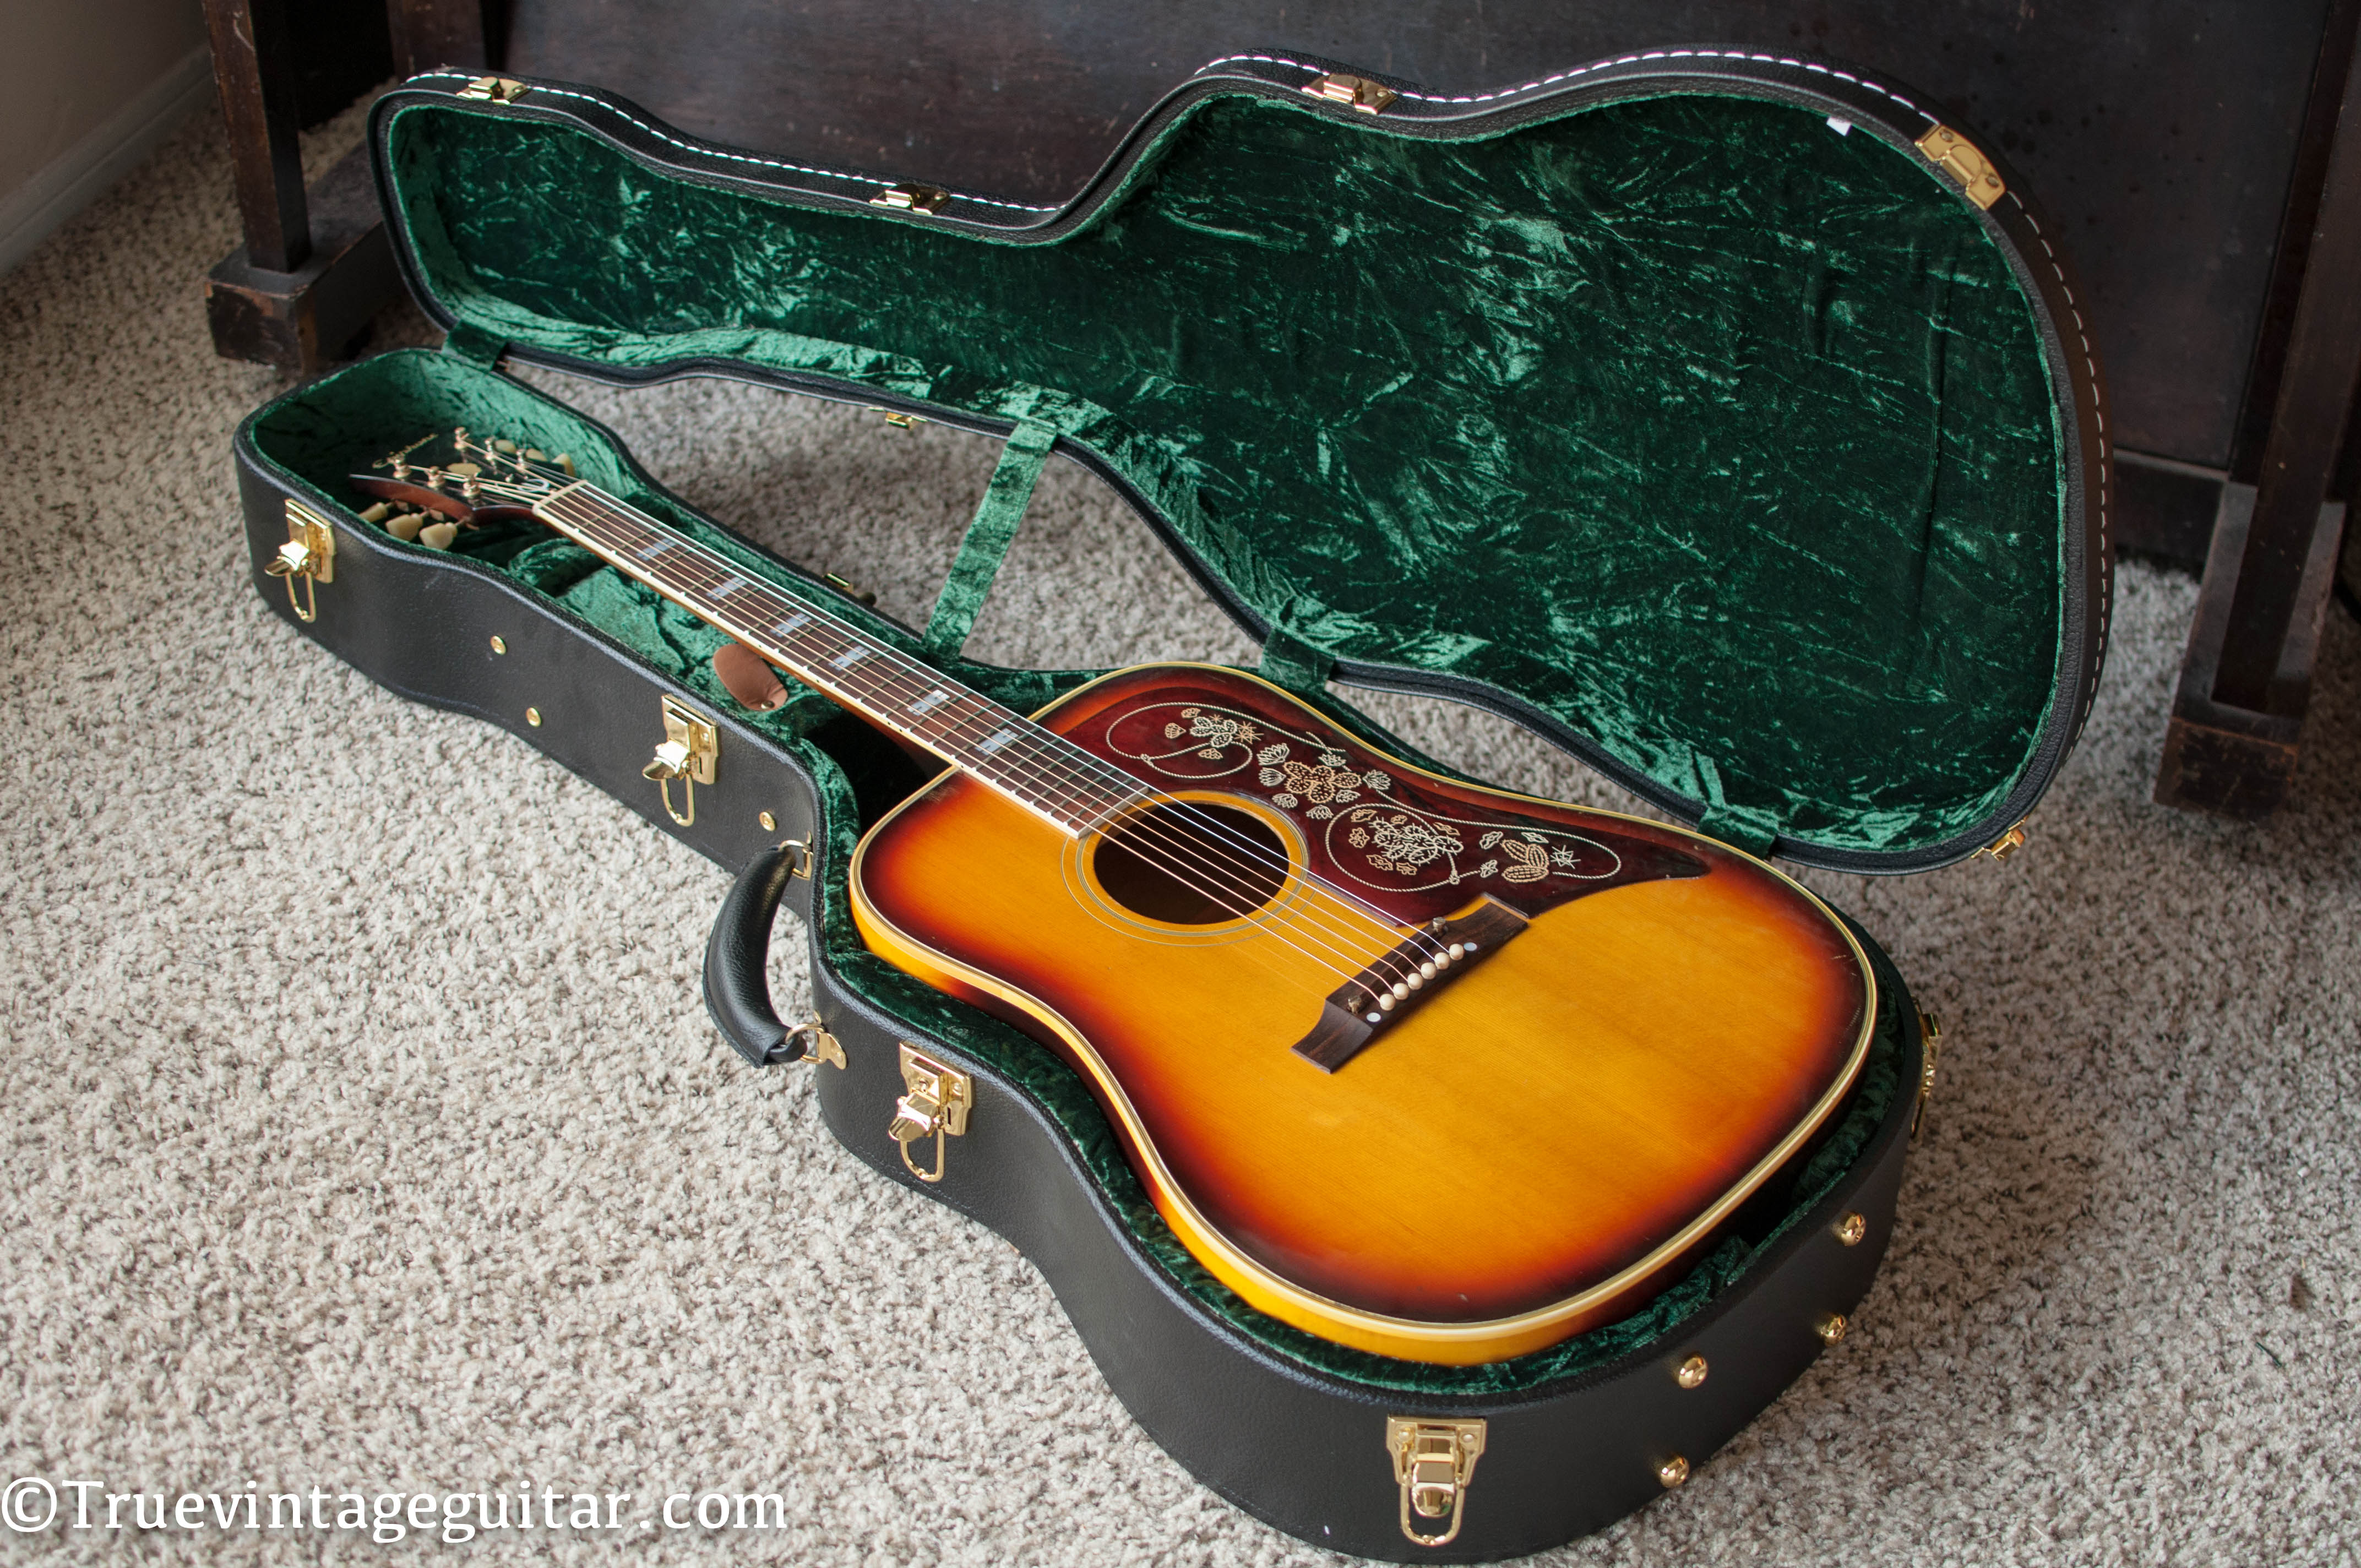 Case for Epiphone Texan and Frontier